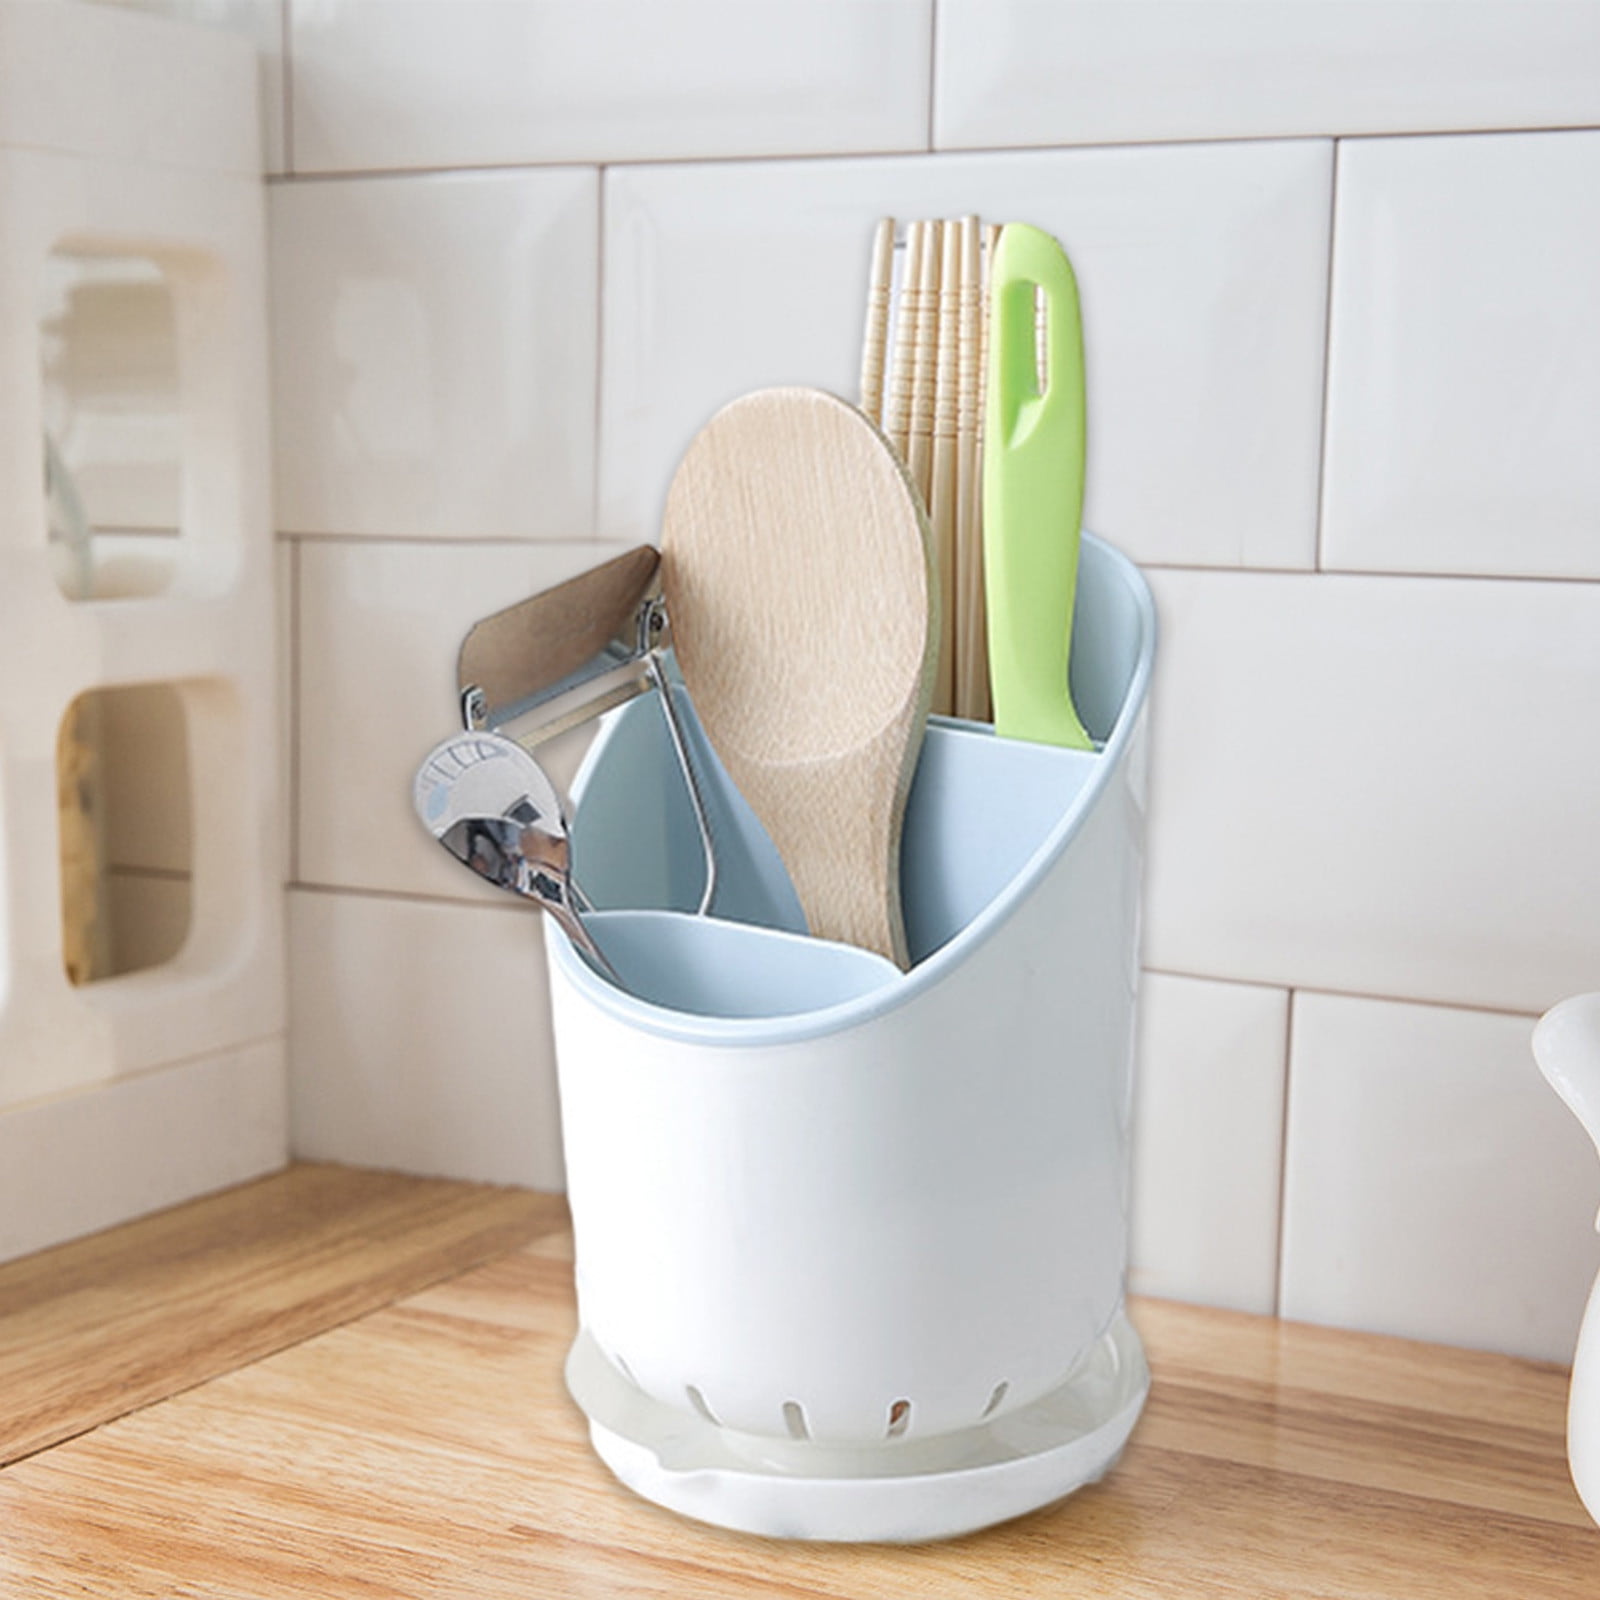 Cascade dishwasher tabs container turned plastic cutlery holder. Cute  silverware cutouts!